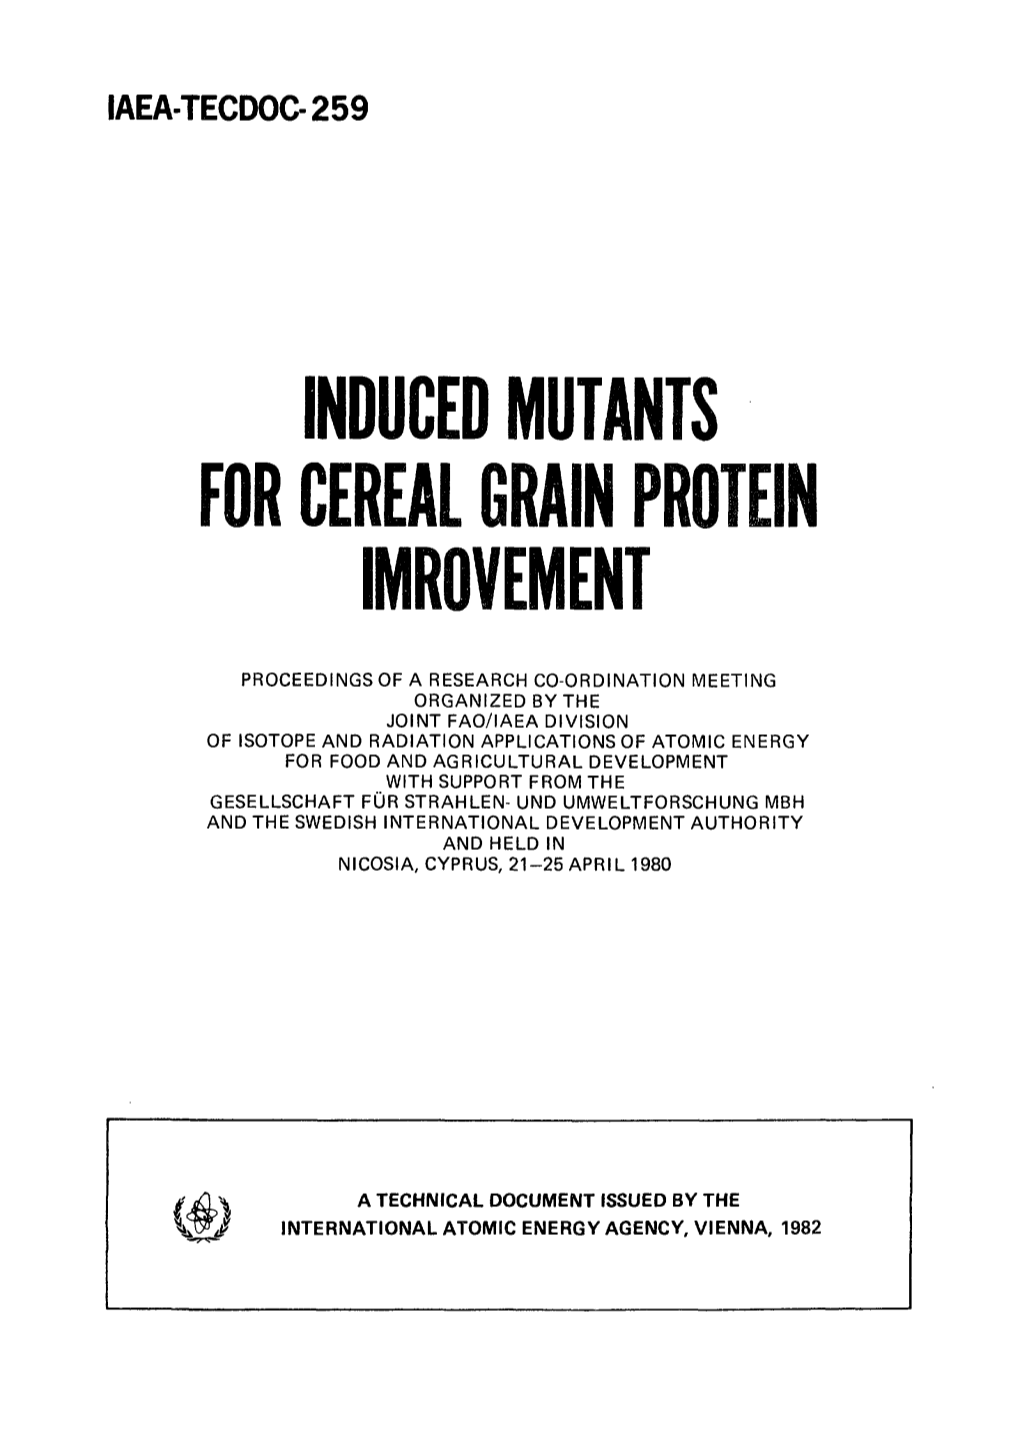 For Cereal Grain Protein Imrovement